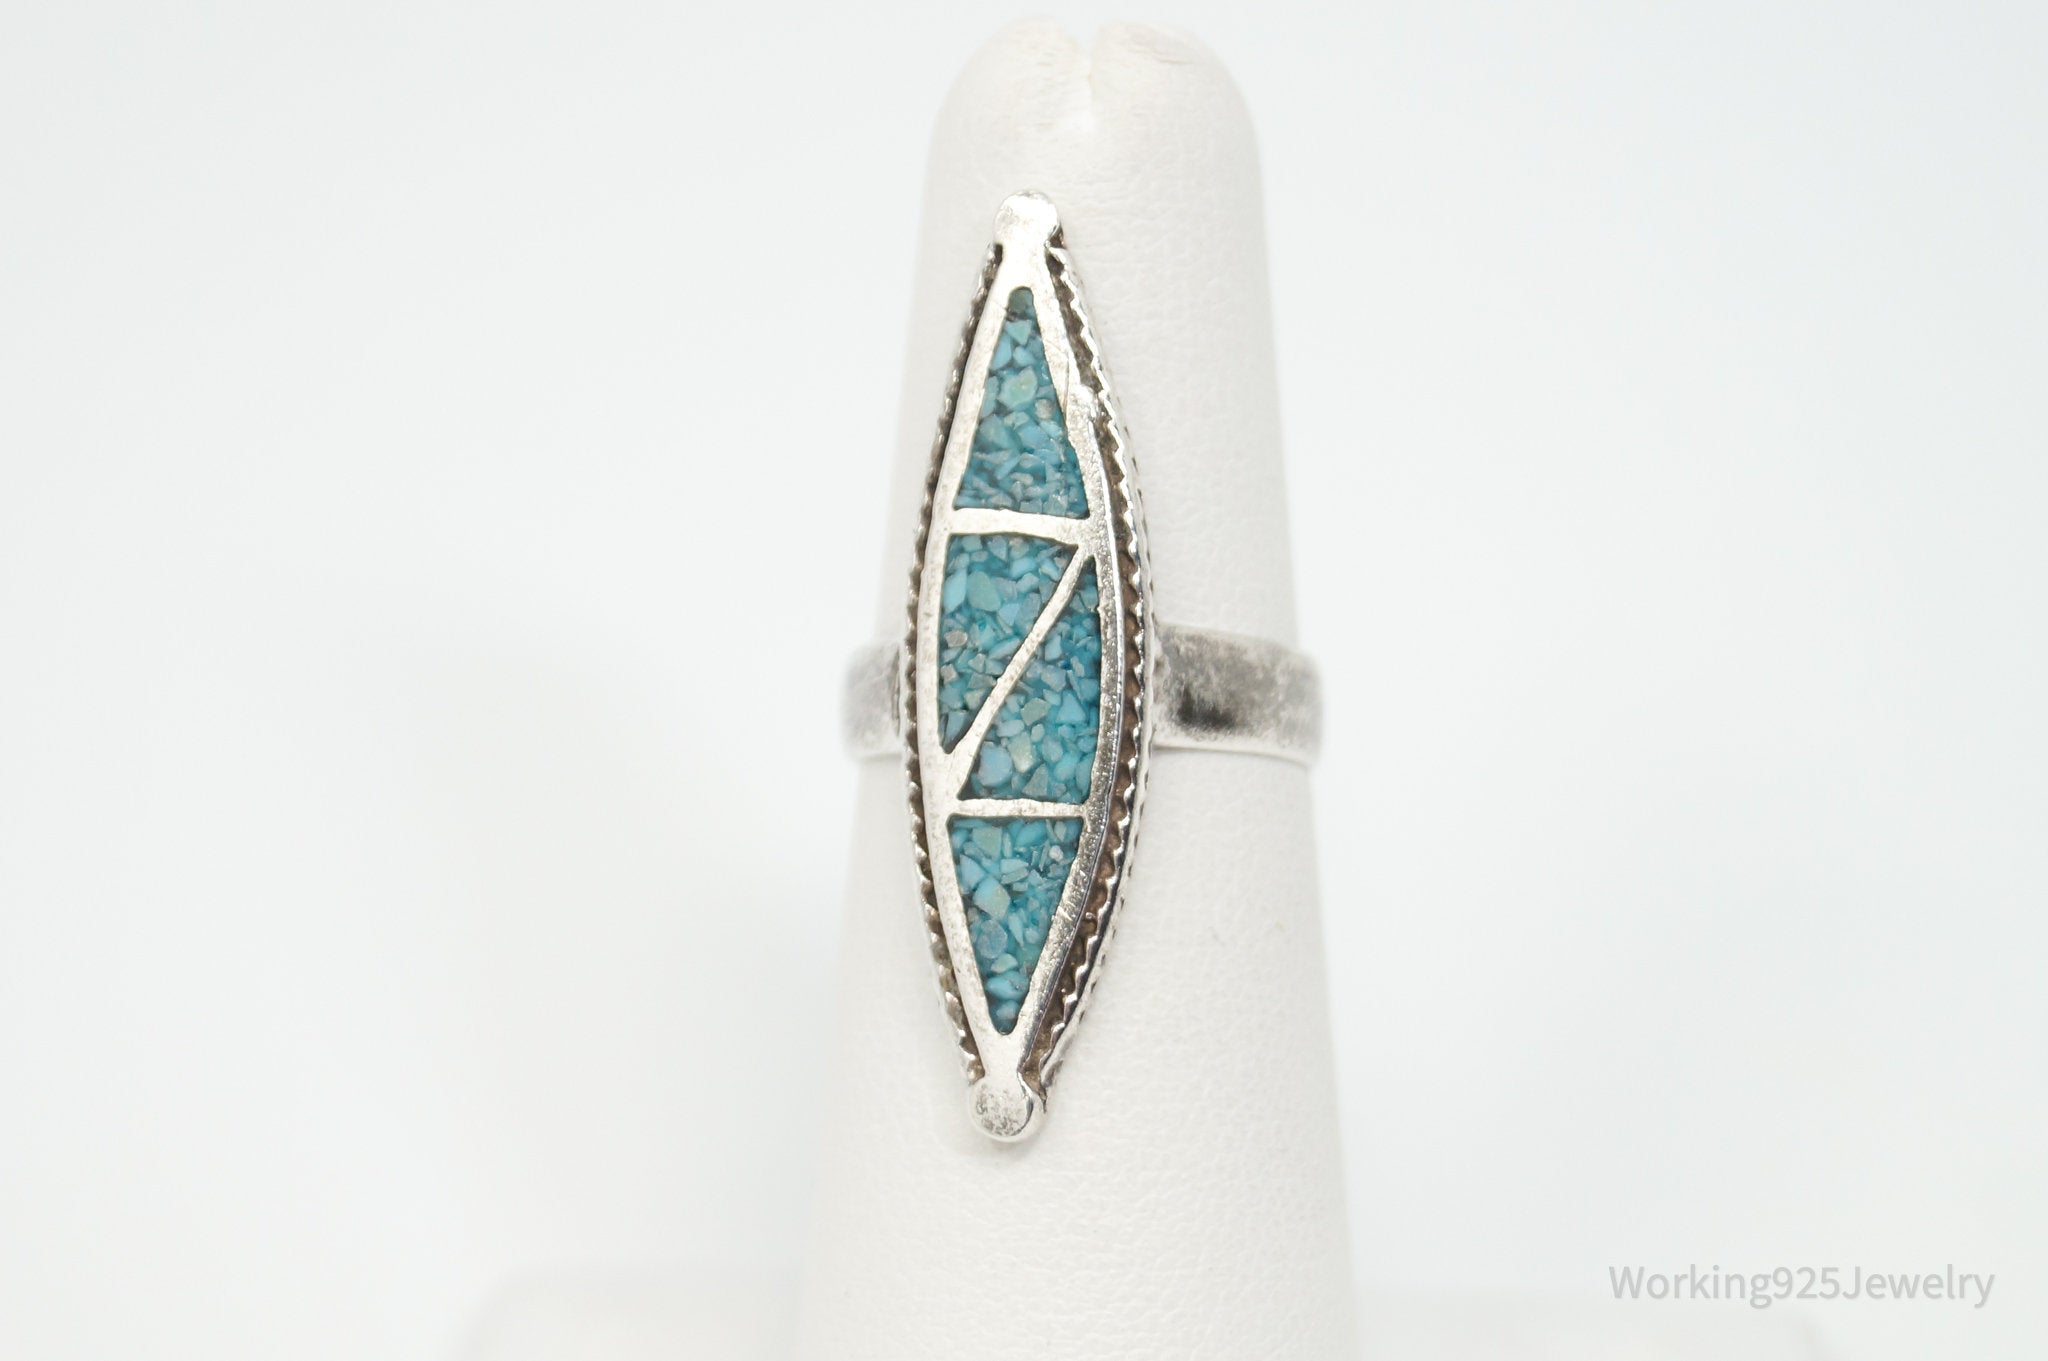 Vtg Native American Crushed Turquoise Unsigned Sterling Silver Ring - Sz 5